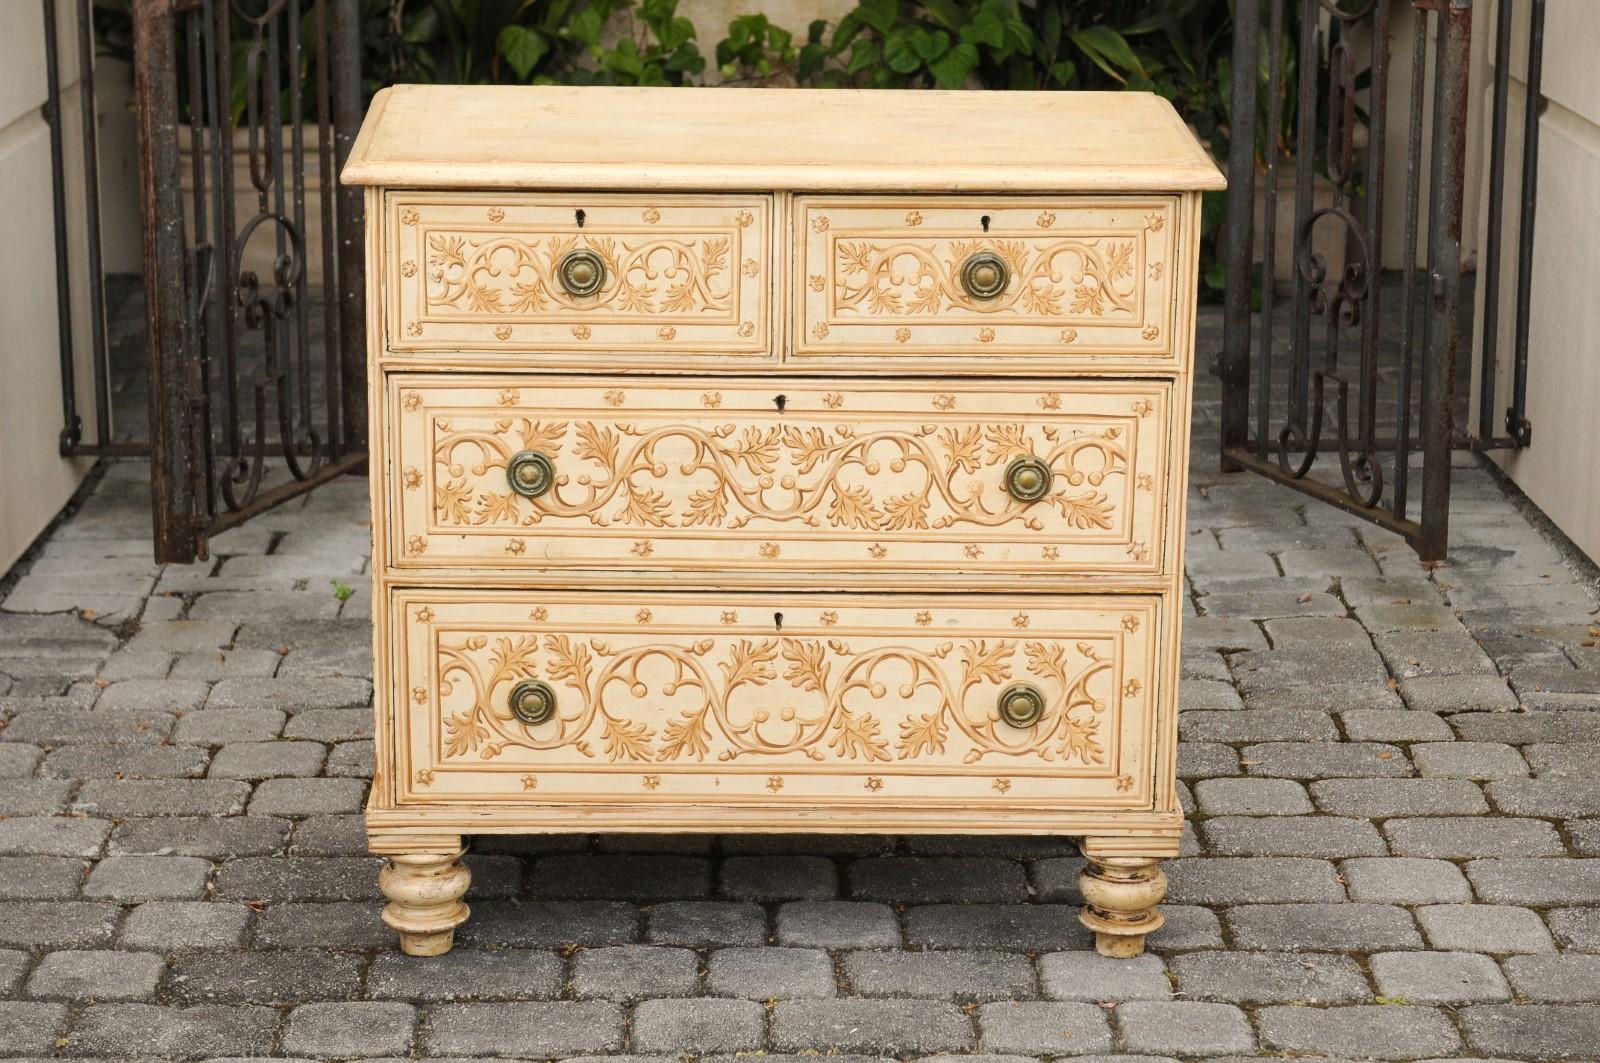 English Painted Wood Four-Drawer Commode with Scrollwork Motifs, circa 1880 For Sale 1